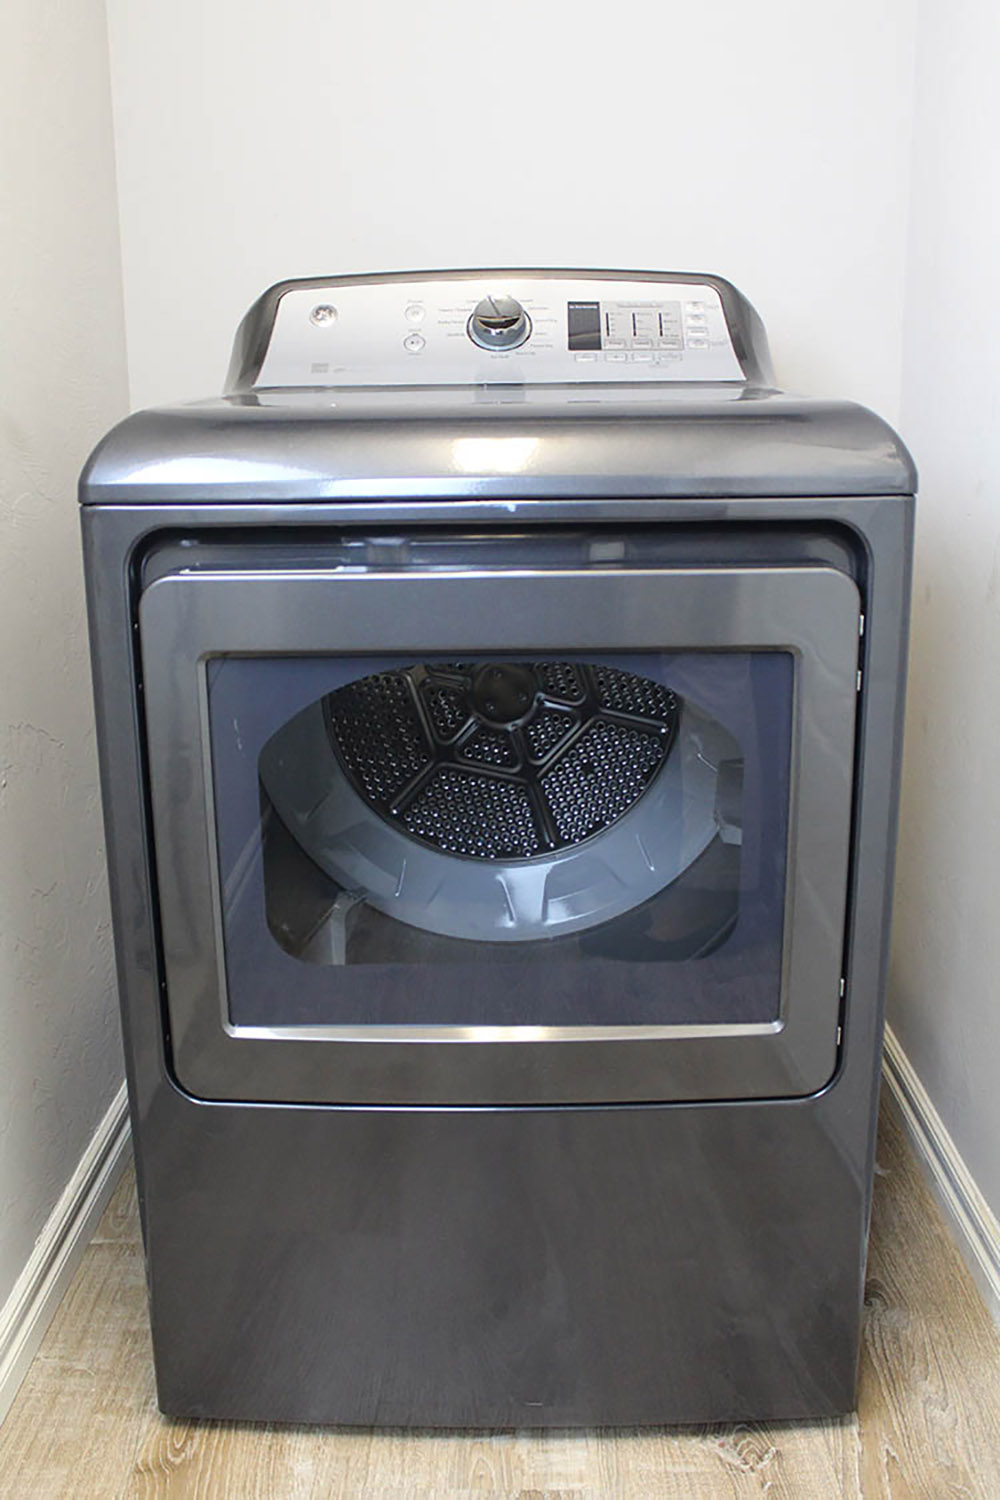 A gray GE dryer sits in an empty laundry room with blank walls.